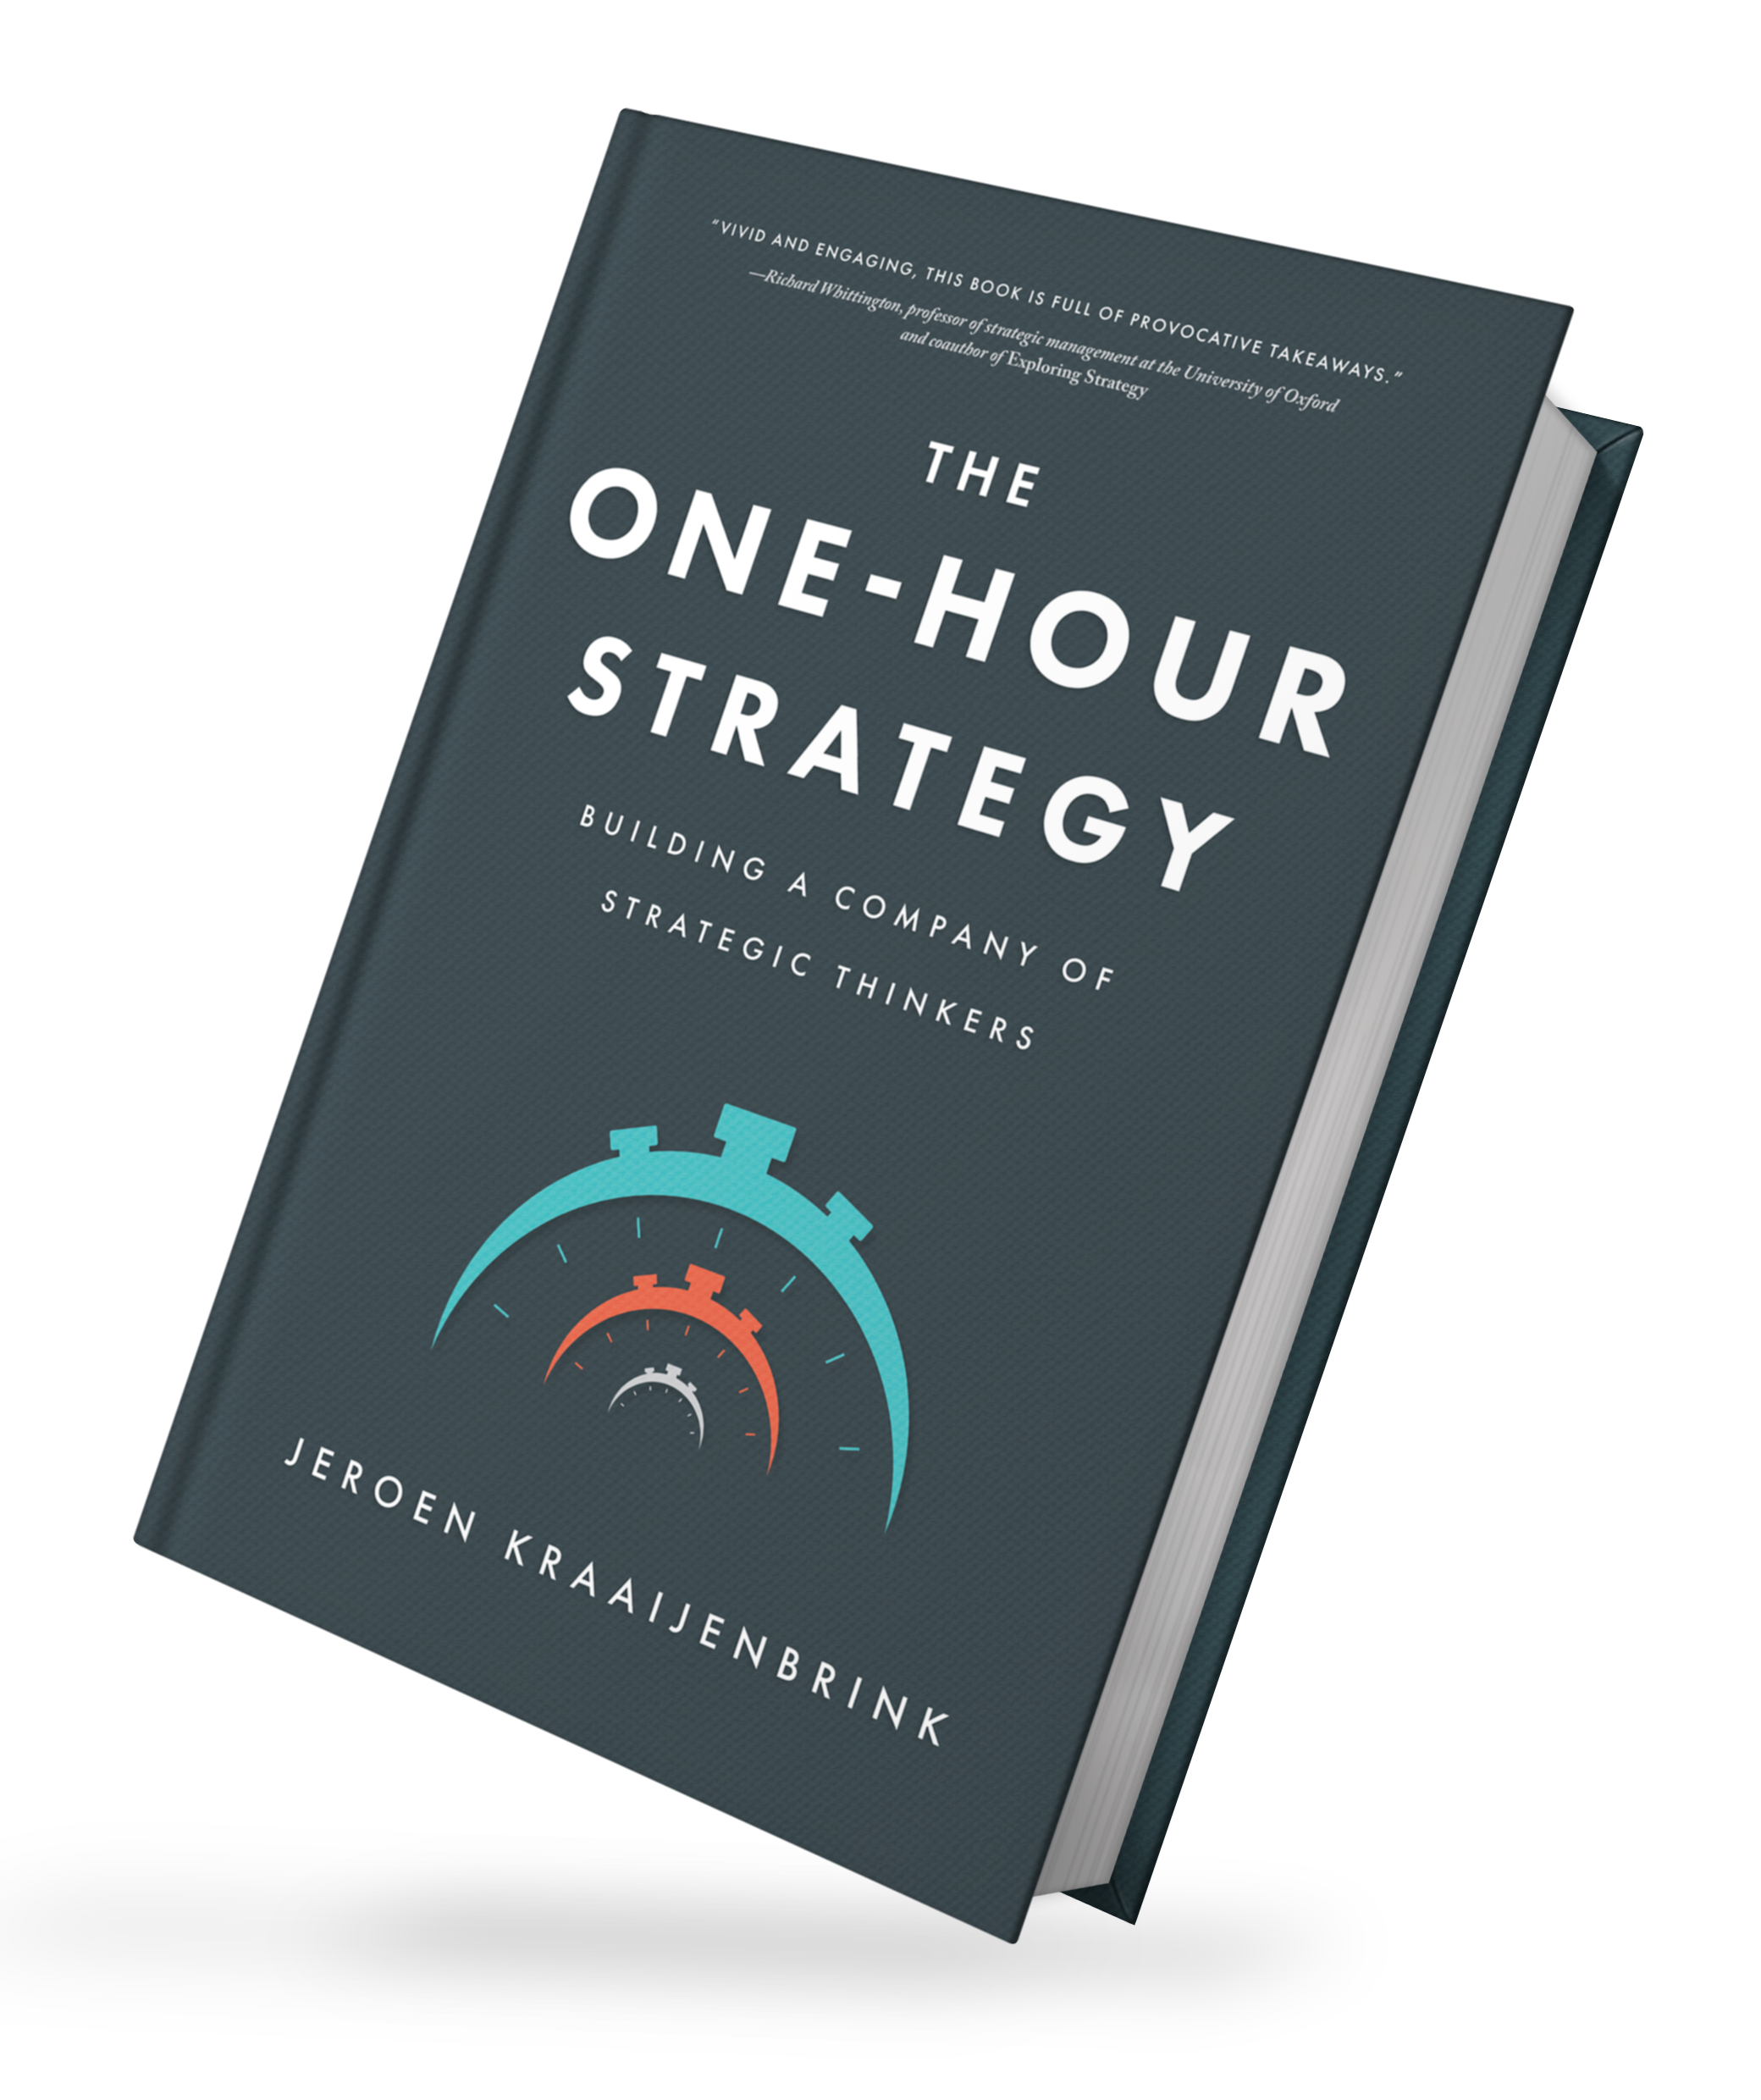 The One-Hours Strategy book